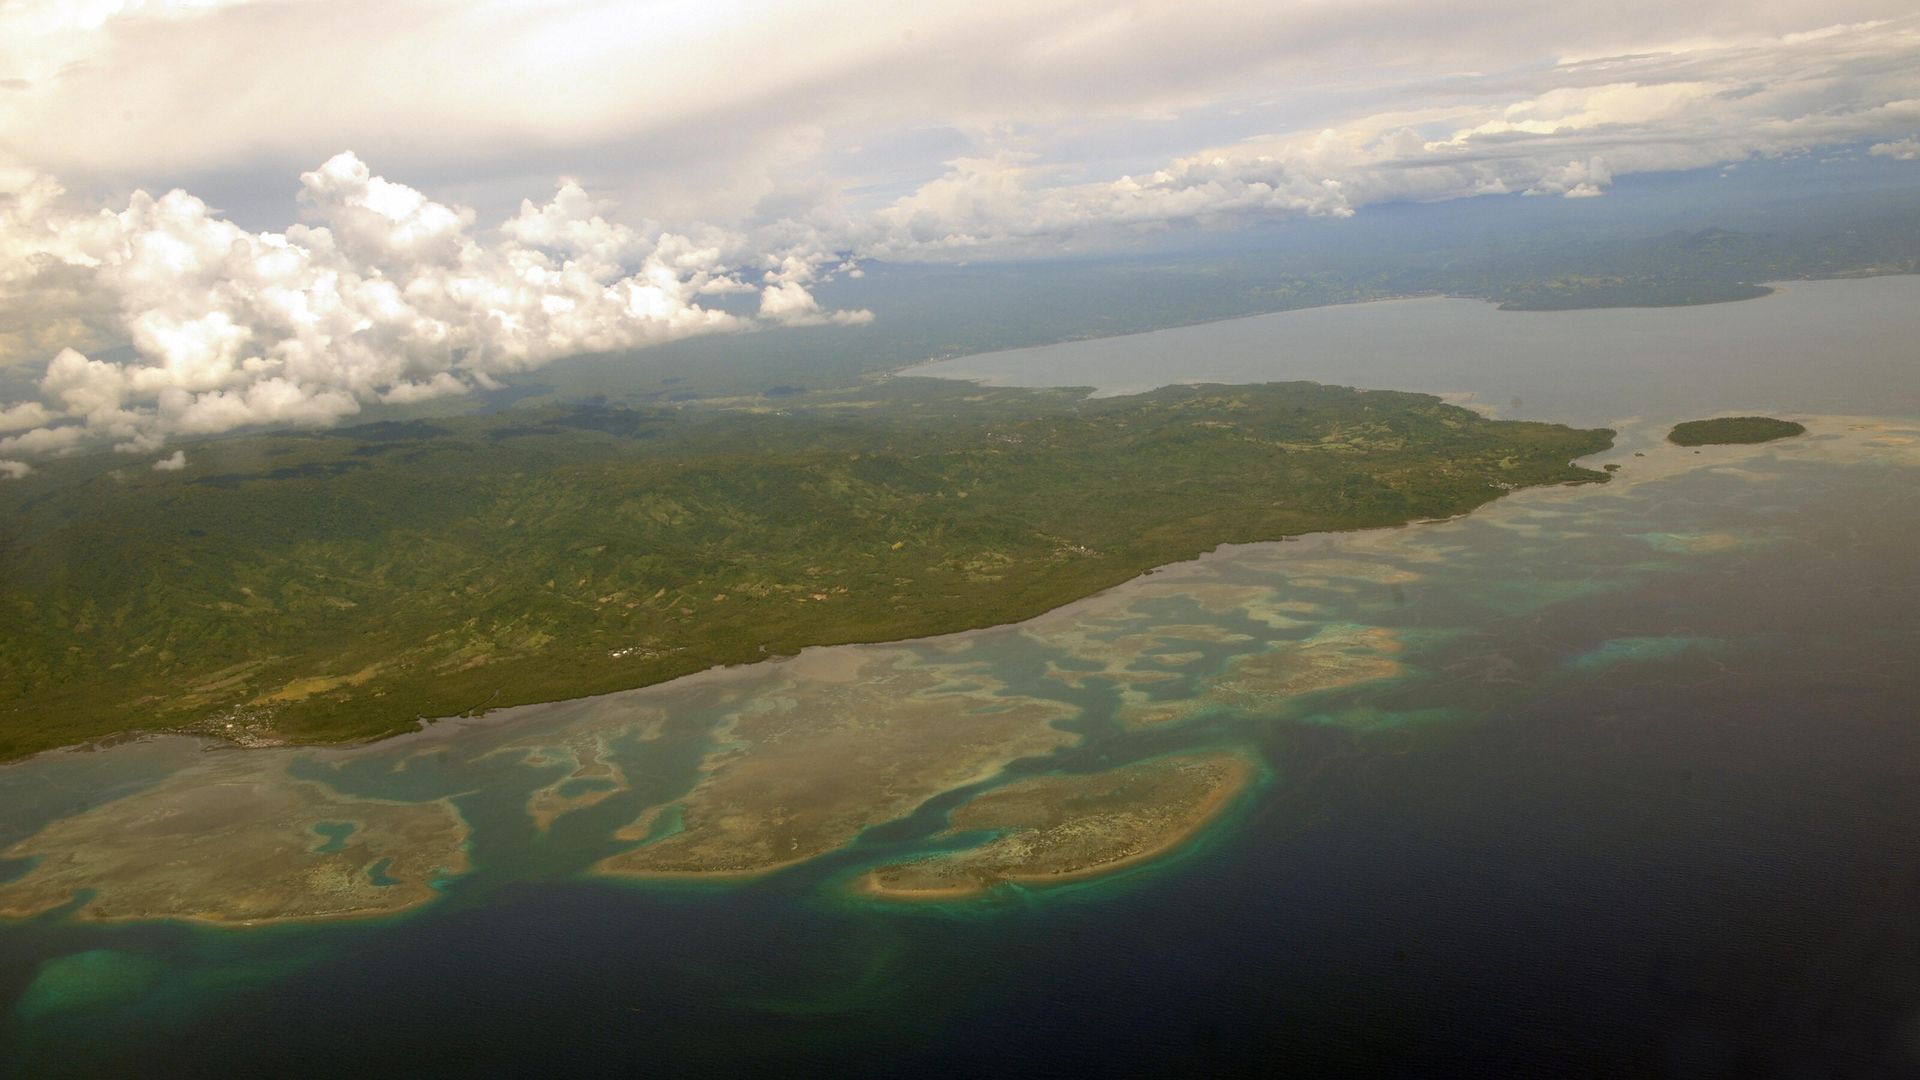 The coast of northern Sulawesi is seen from a plane approaching the capital city of Manado 